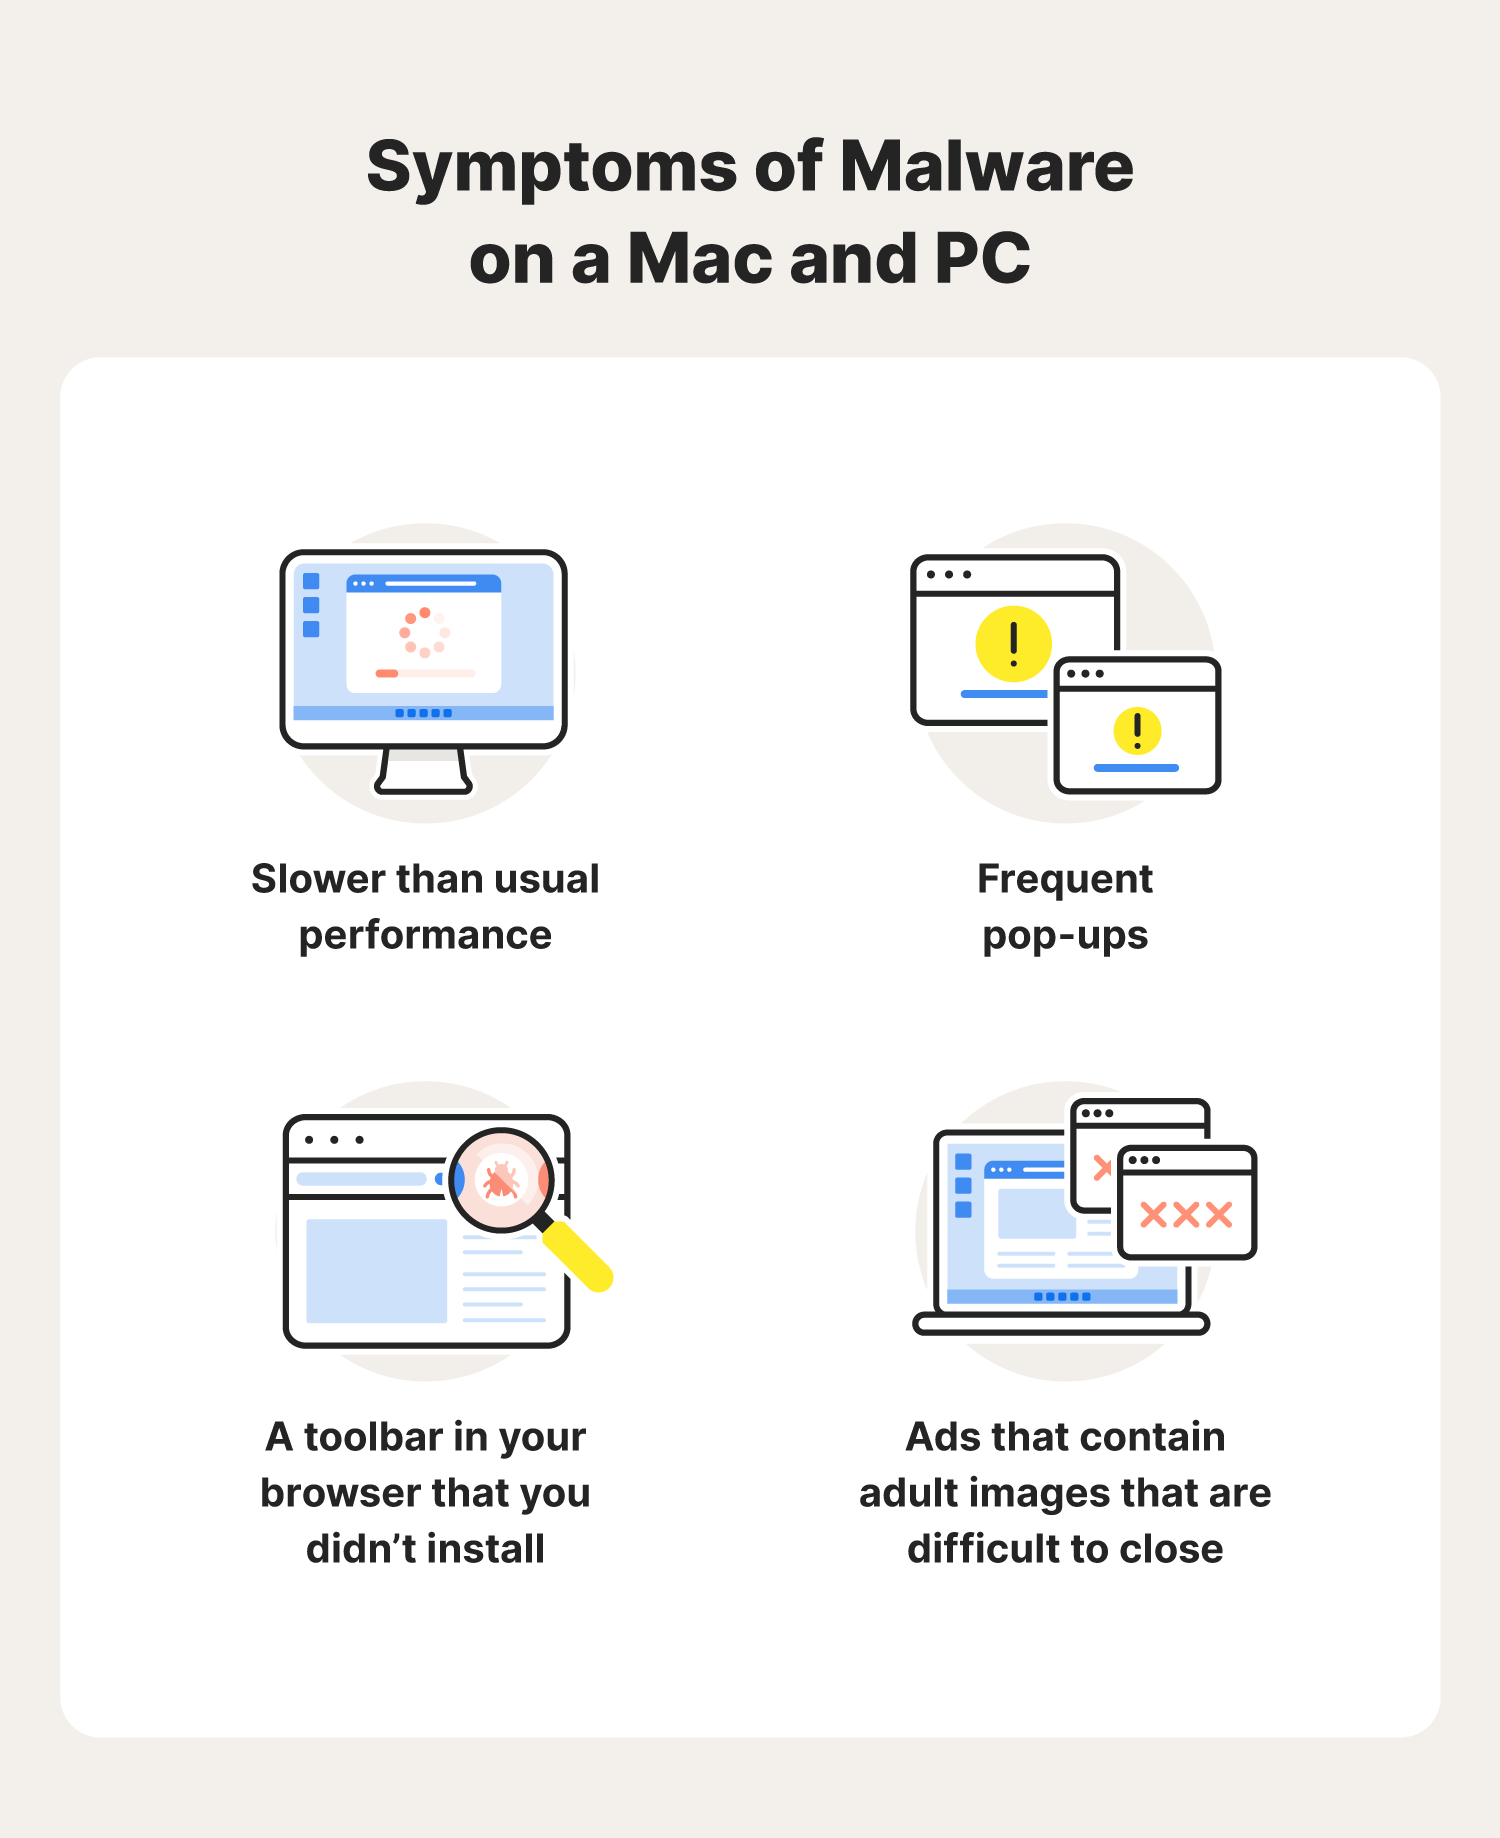 If any malware or malicious files are detected, follow the prompts to remove them.
Restart your computer to ensure all changes are applied.